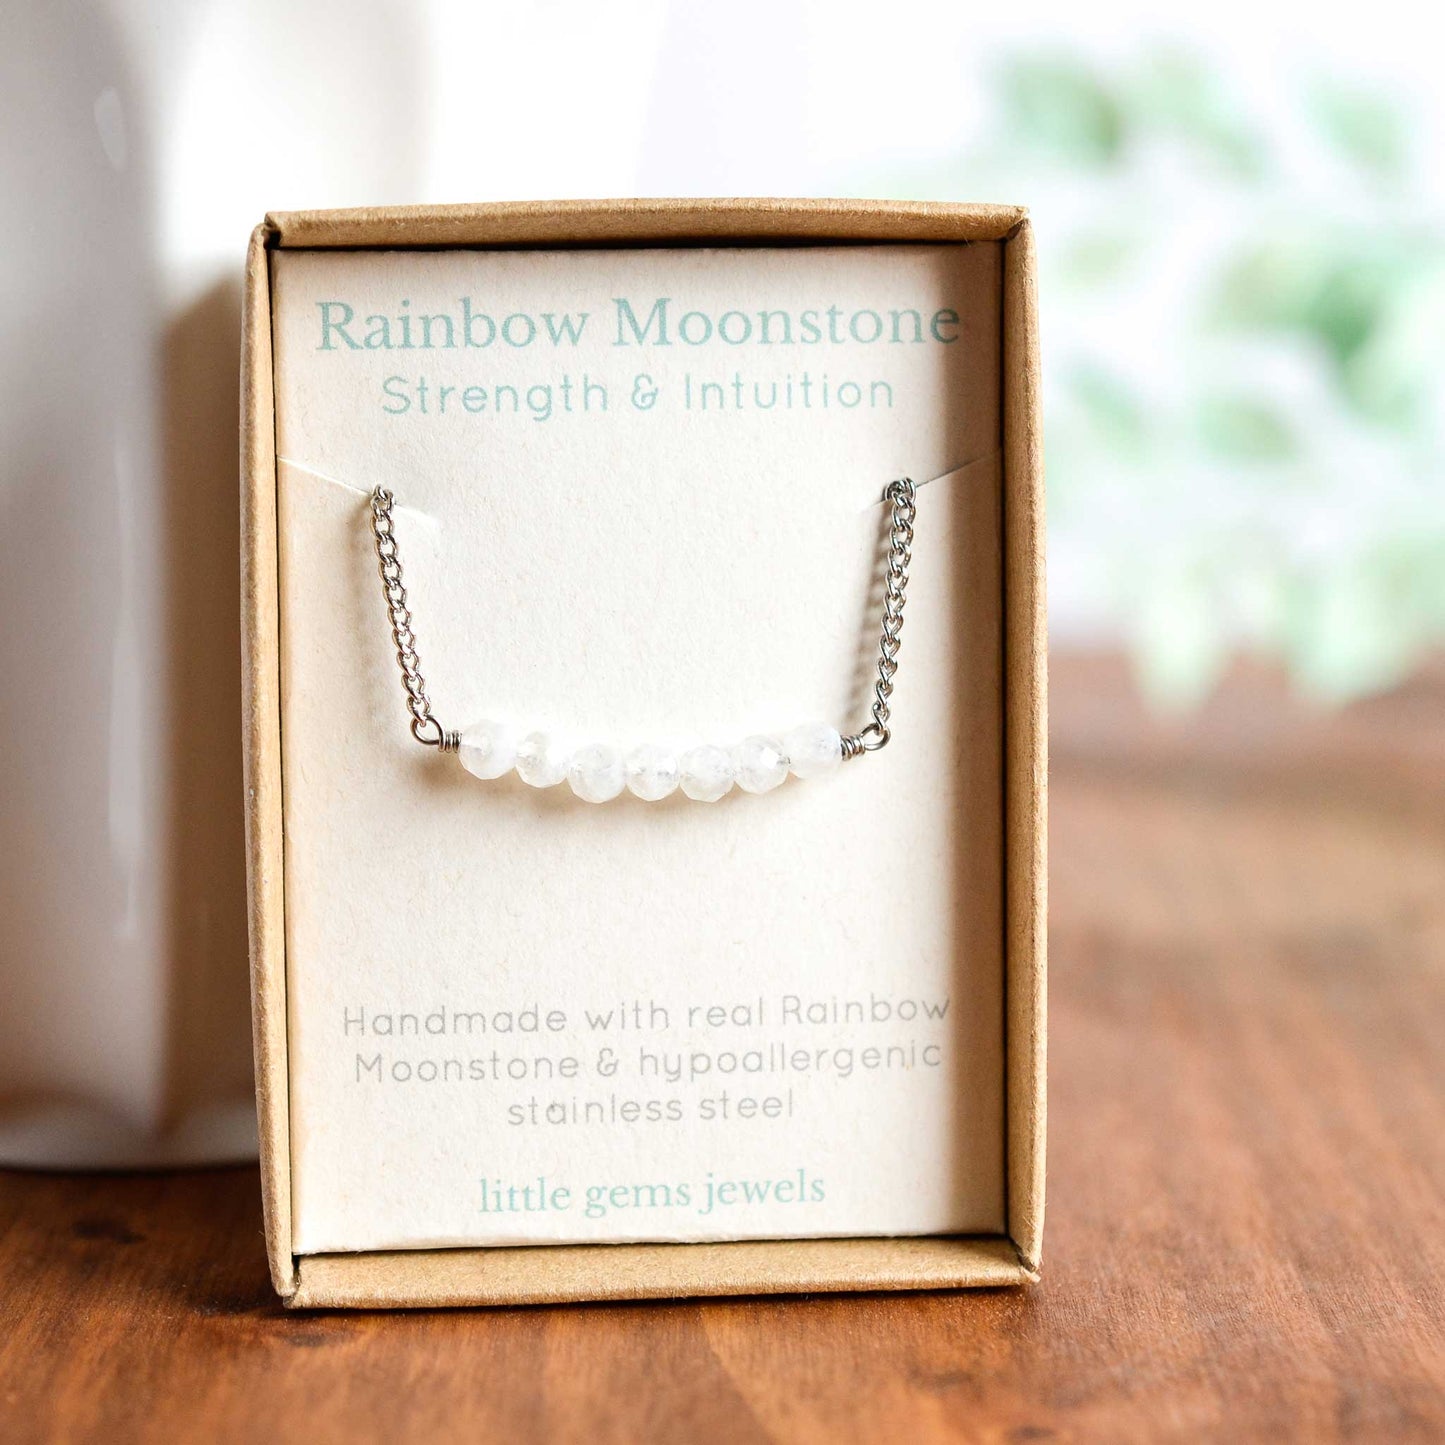 Rainbow Moonstone necklace in eco friendly gift box